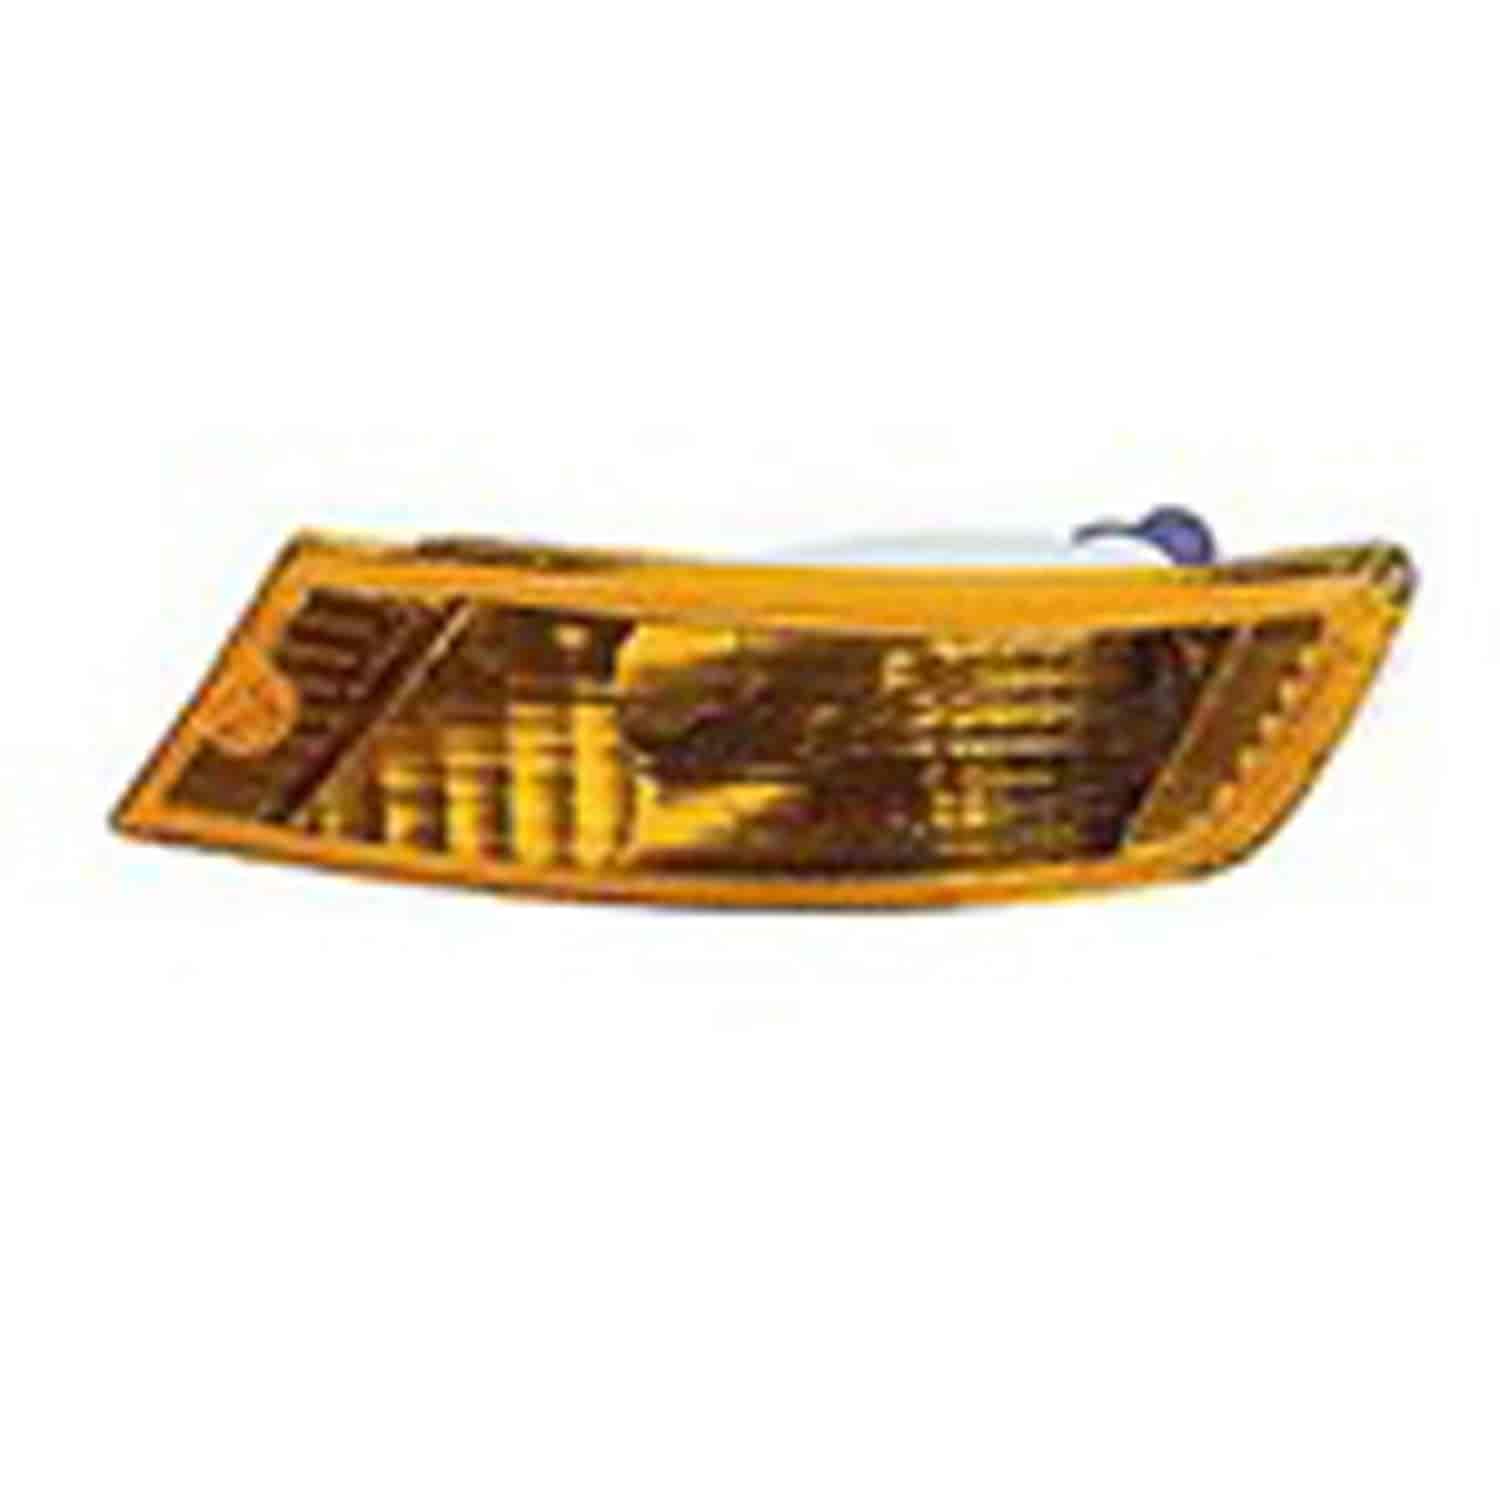 This amber park / turn signal lens from